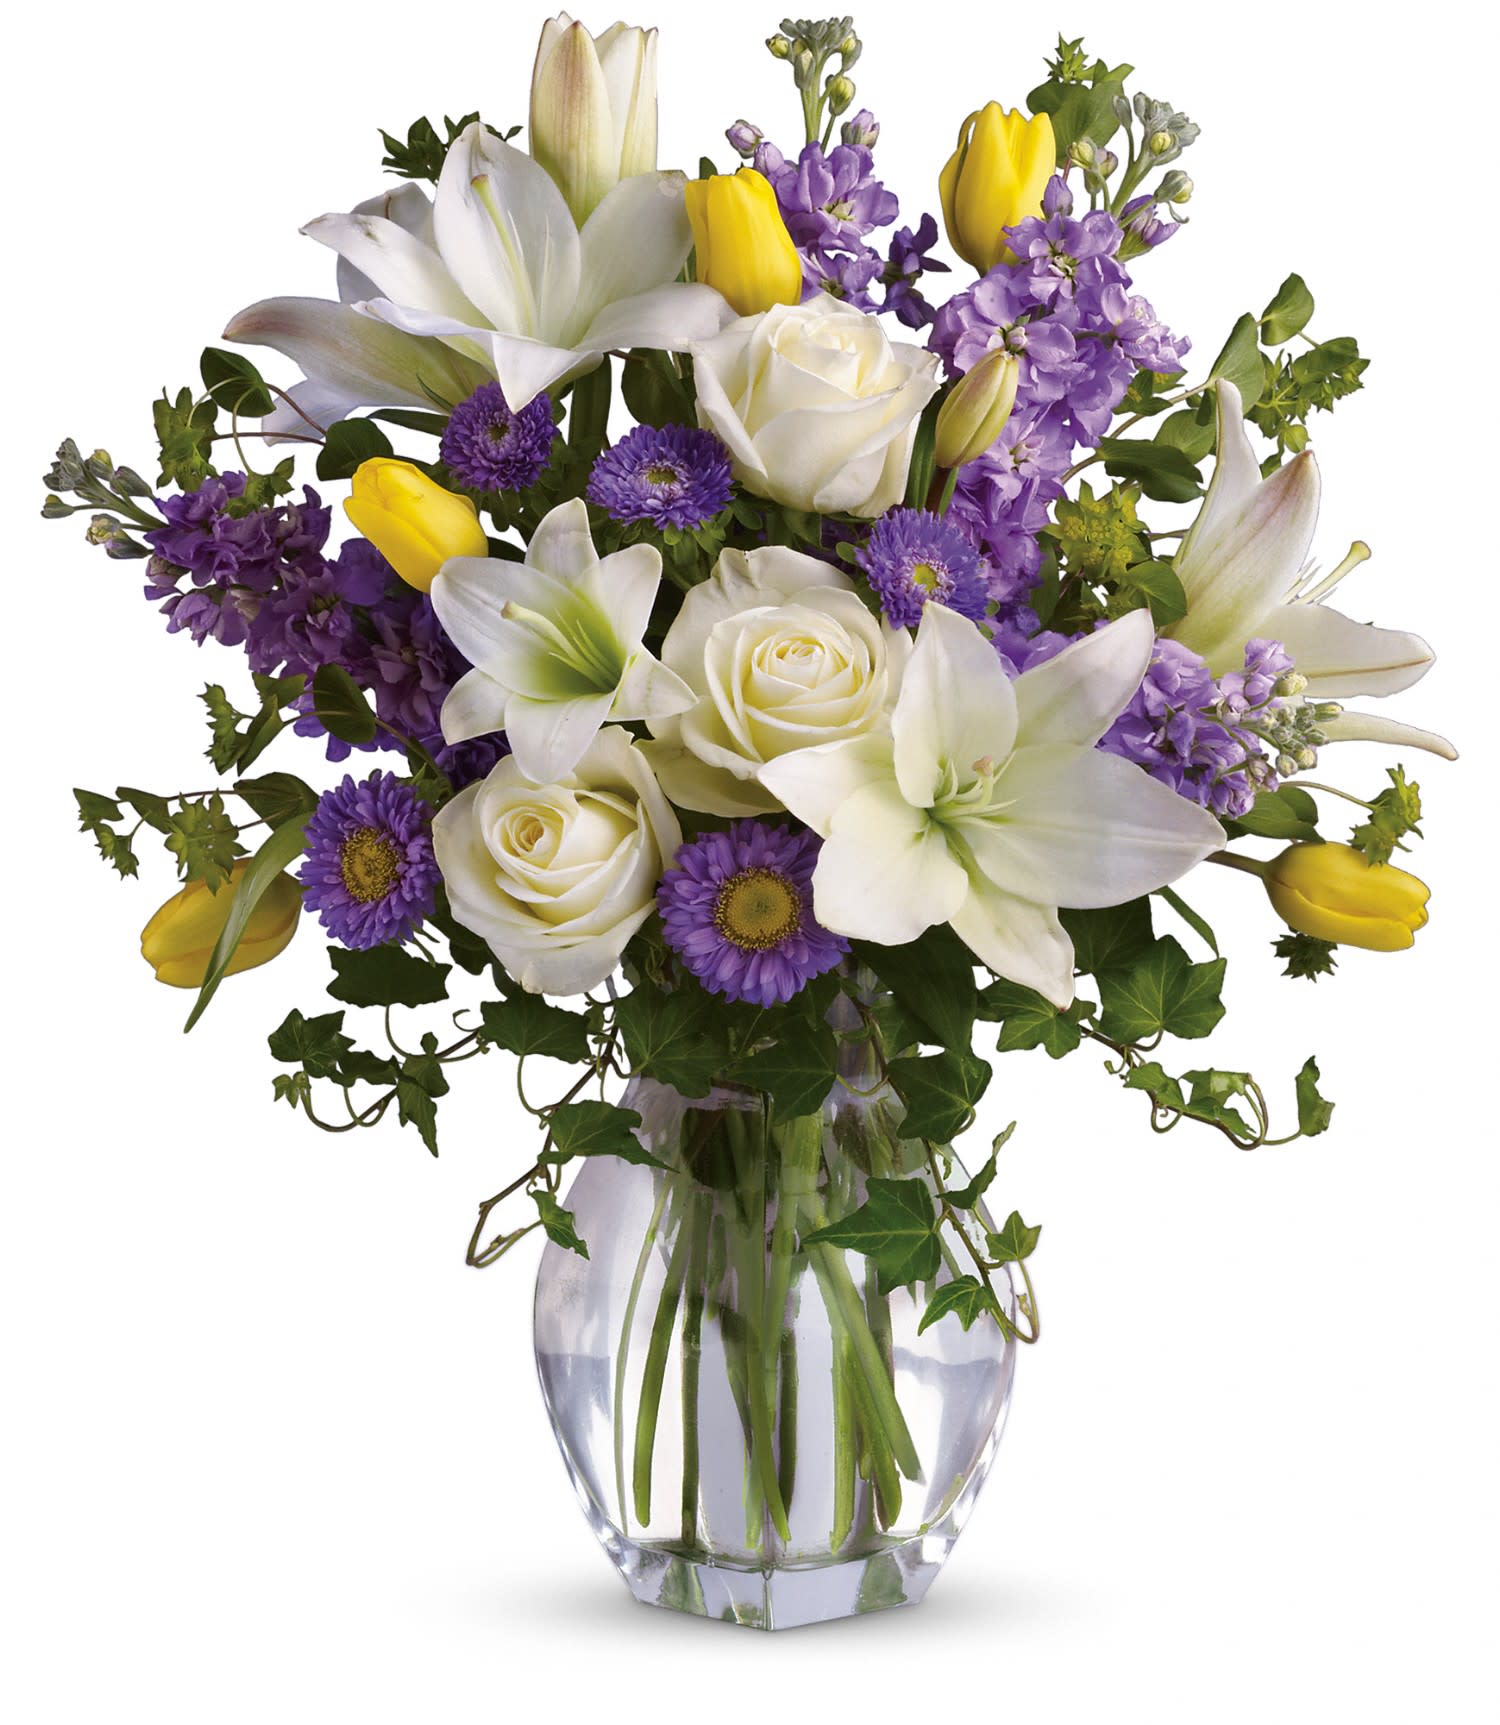 Spring Waltz - Serene crÃ¨me roses, yellow tulips, white asiatic lilies, lavender stock and matsumoto asters are perfectly arranged with spring's freshest greenery and delivered in a lovely clear glass vase. Send it and you'll definitely waltz right in to someone's good graces! Approximately 17 1/2&quot; W x 20&quot; H  T141-1A